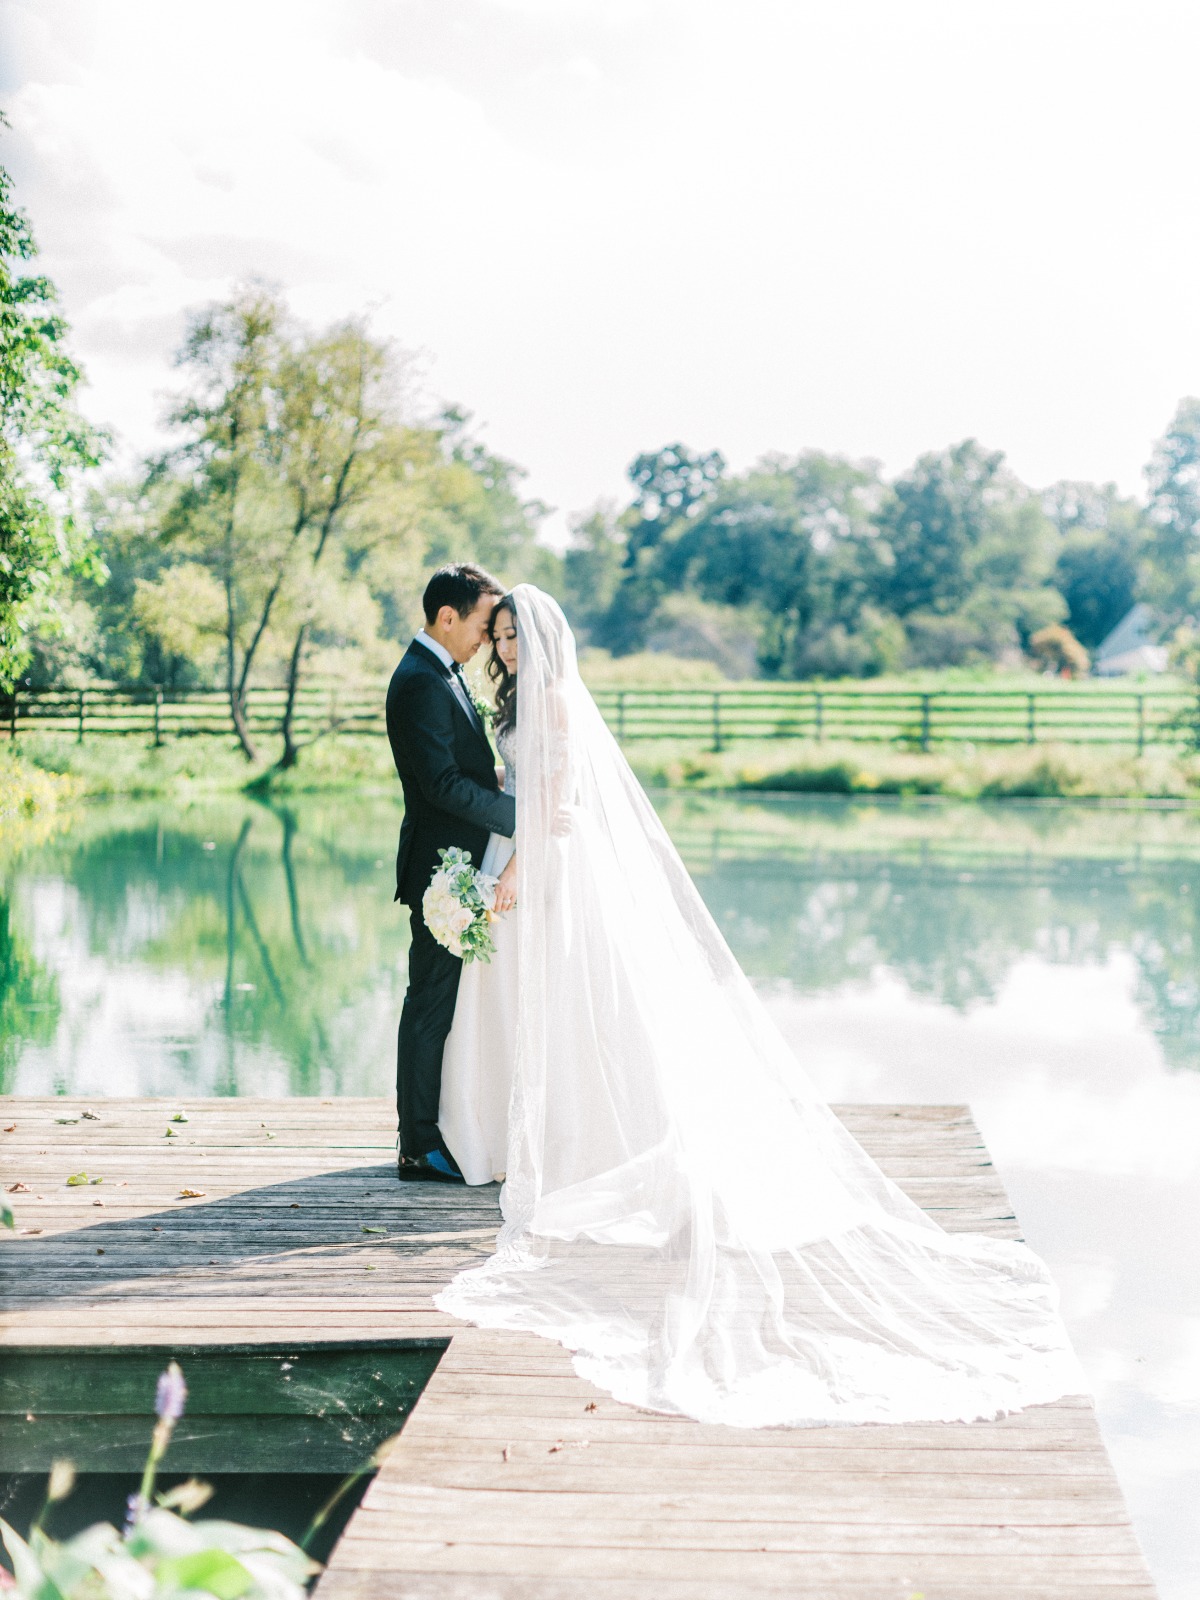 Portrait of bride and groom in front of lake